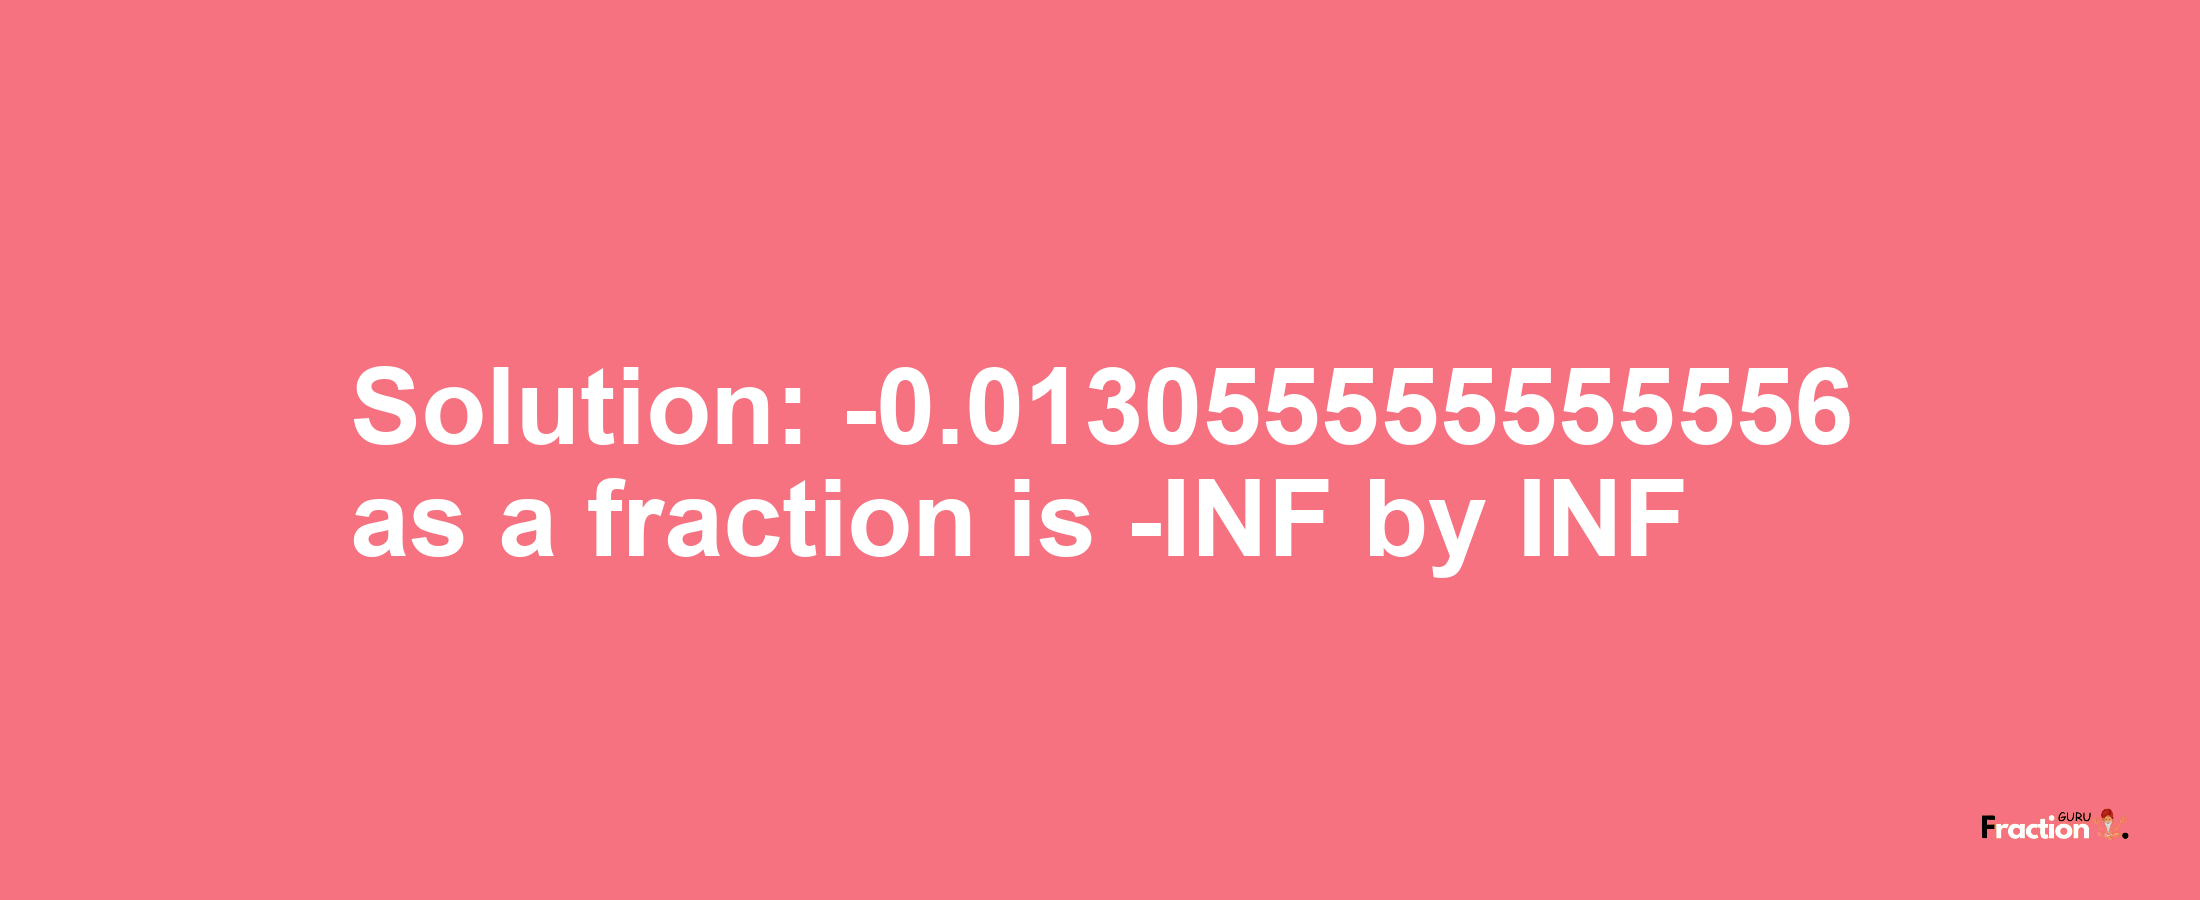 Solution:-0.013055555555556 as a fraction is -INF/INF